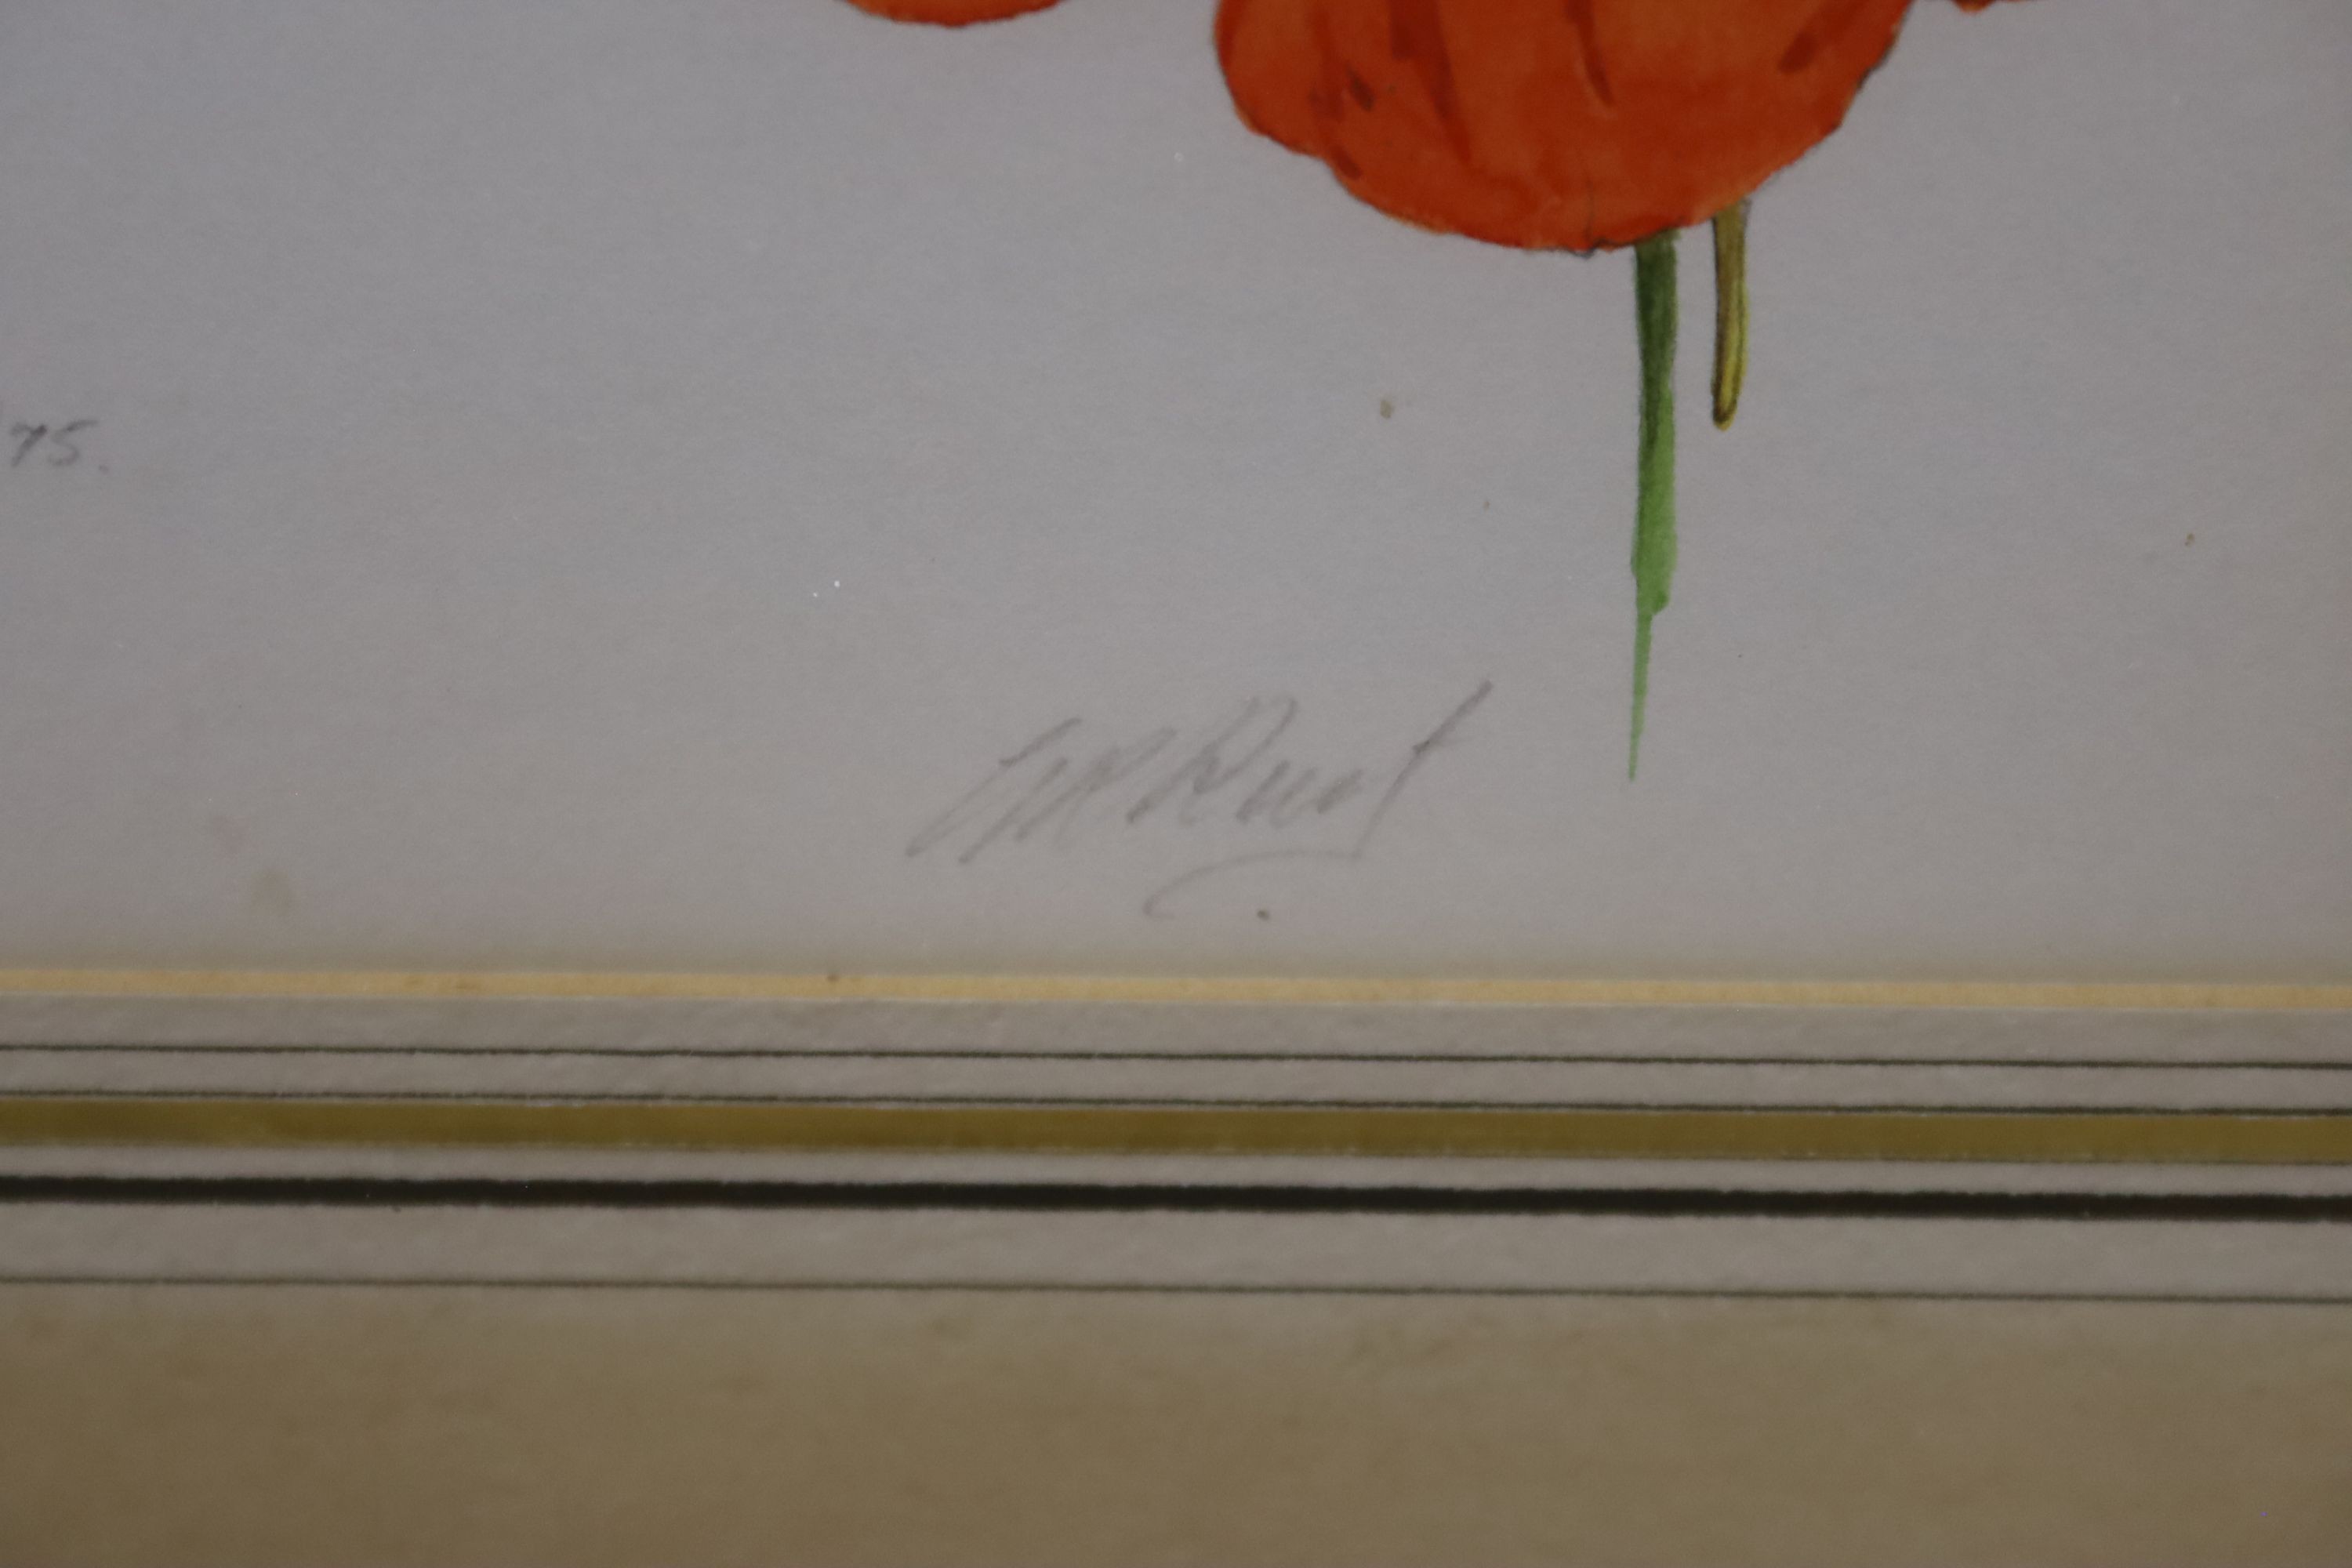 Graham Rust (1942-), pencil and watercolour, Nasturtium, Agra, 7/1/75, signed with Spink label verso, 14 x 20cm